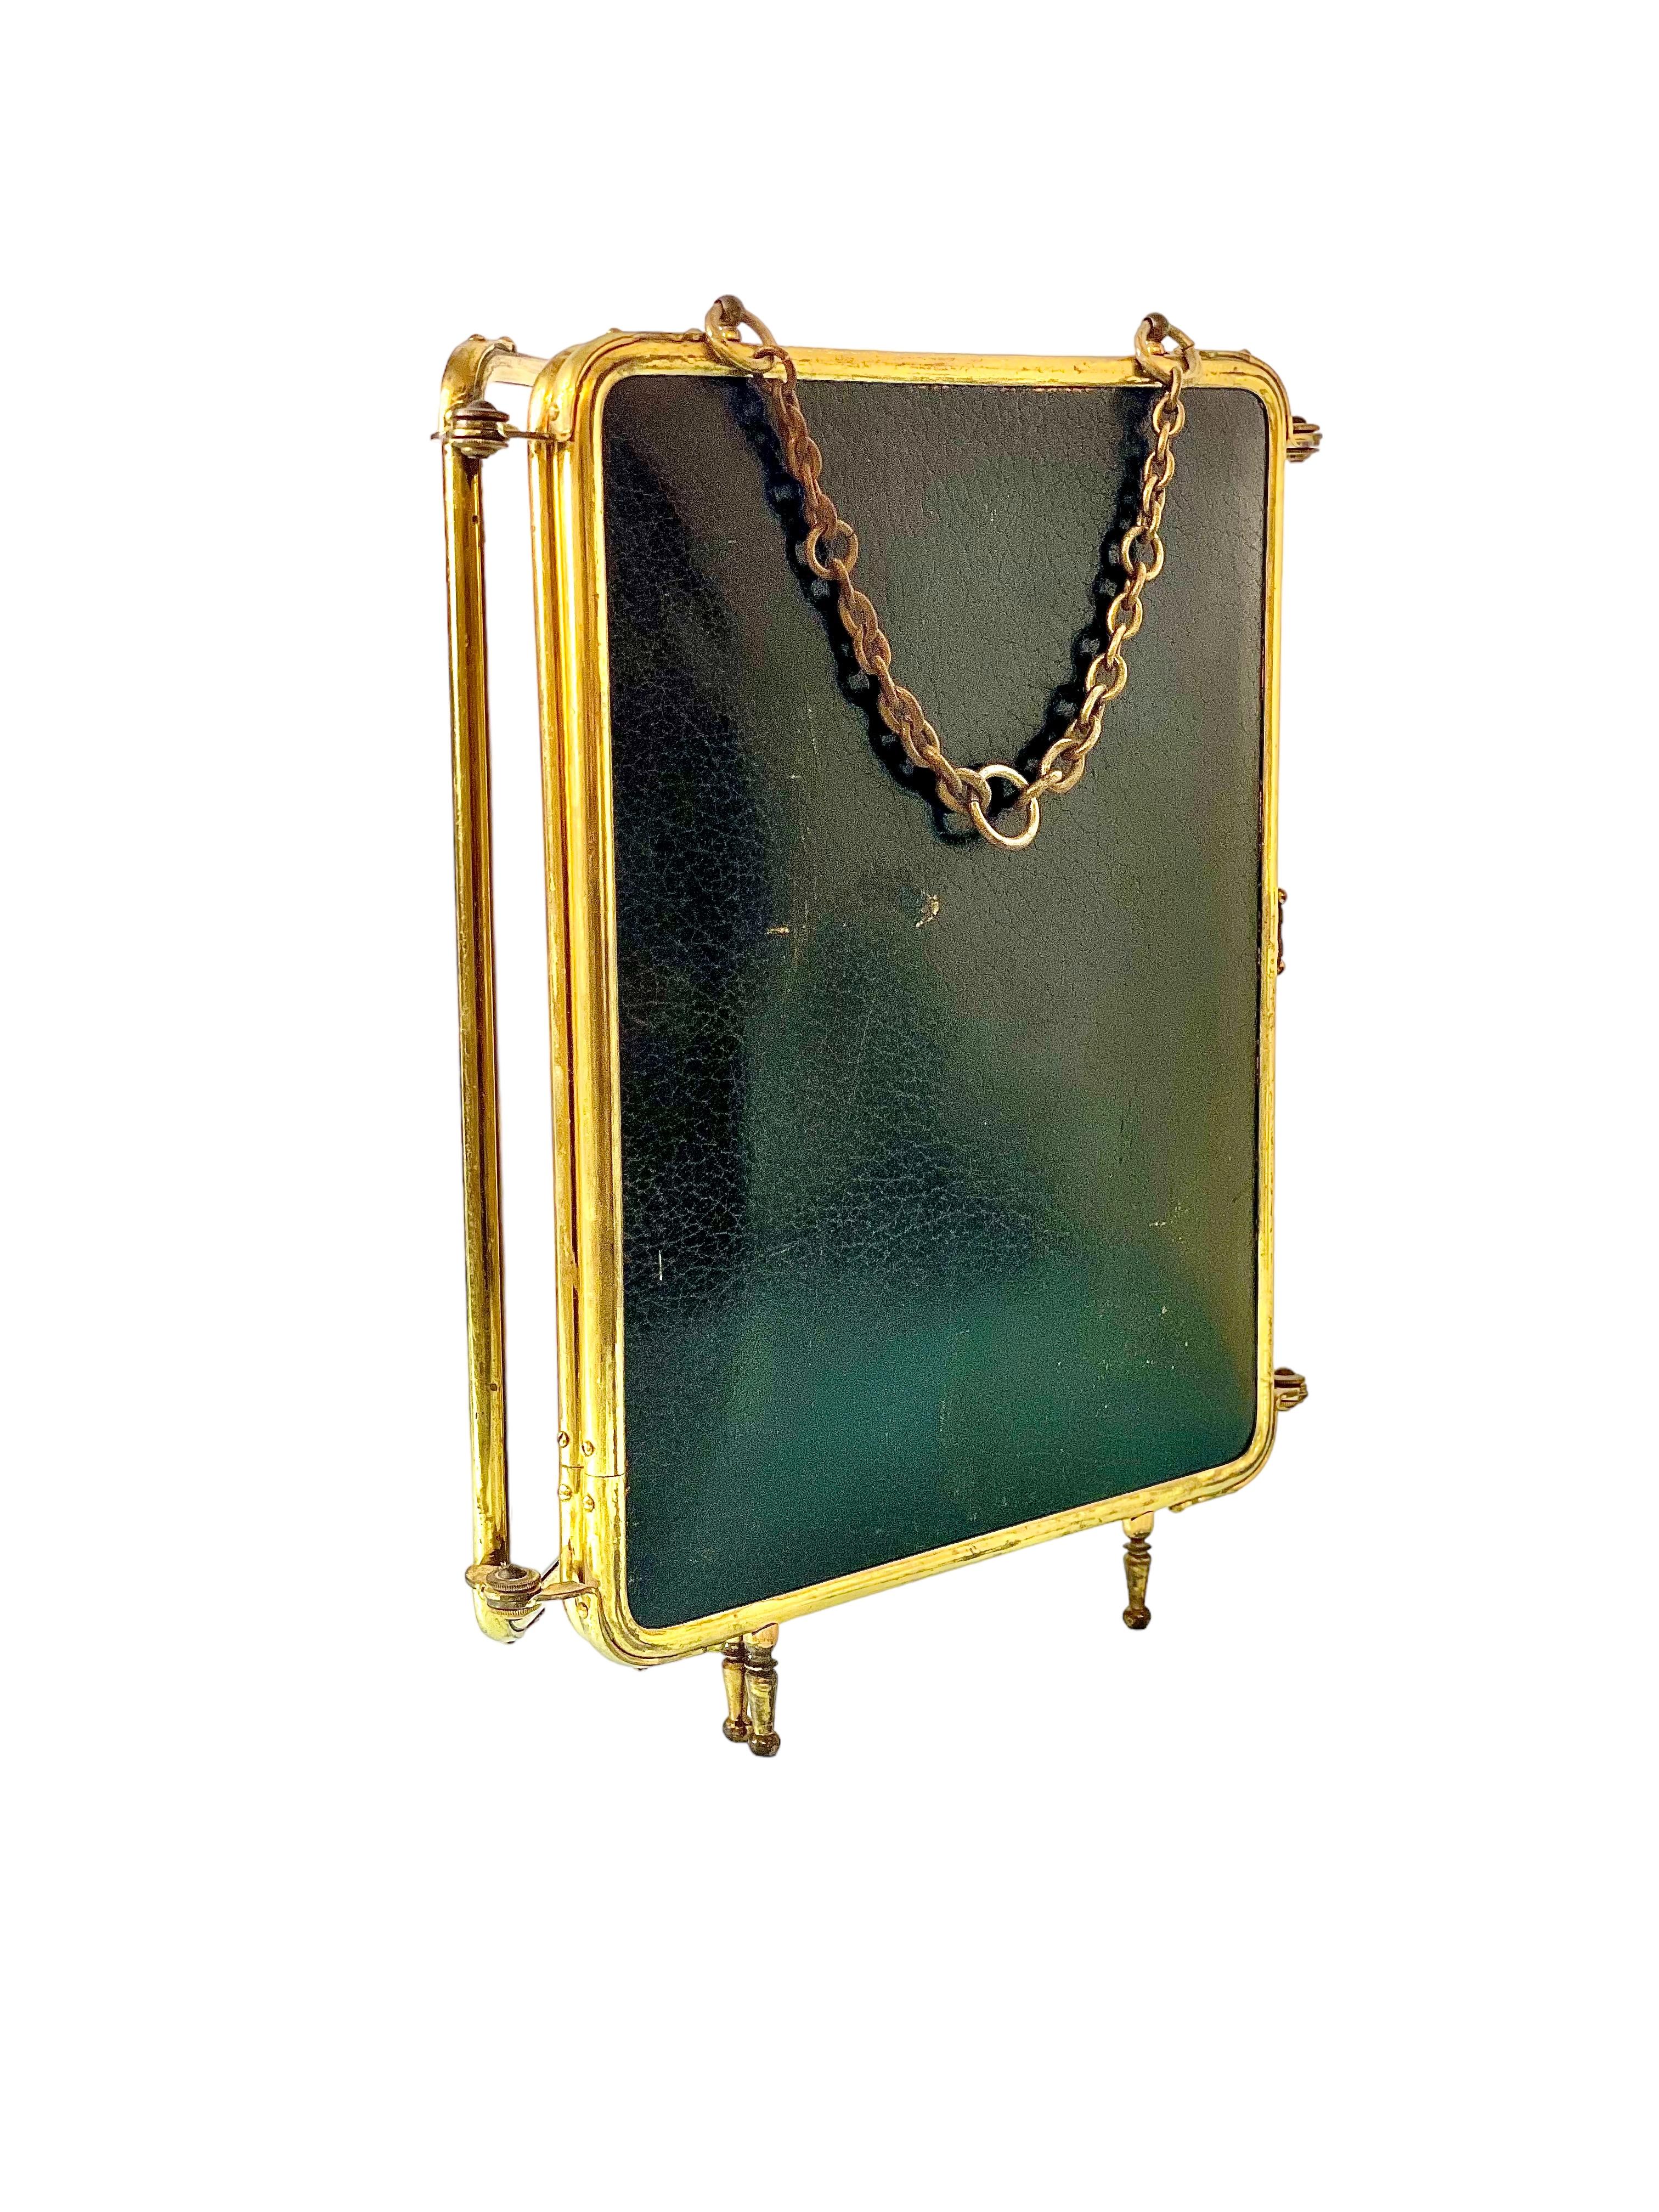 20th Century Triptych Barber's Mirror in Gilt Brass and Leather